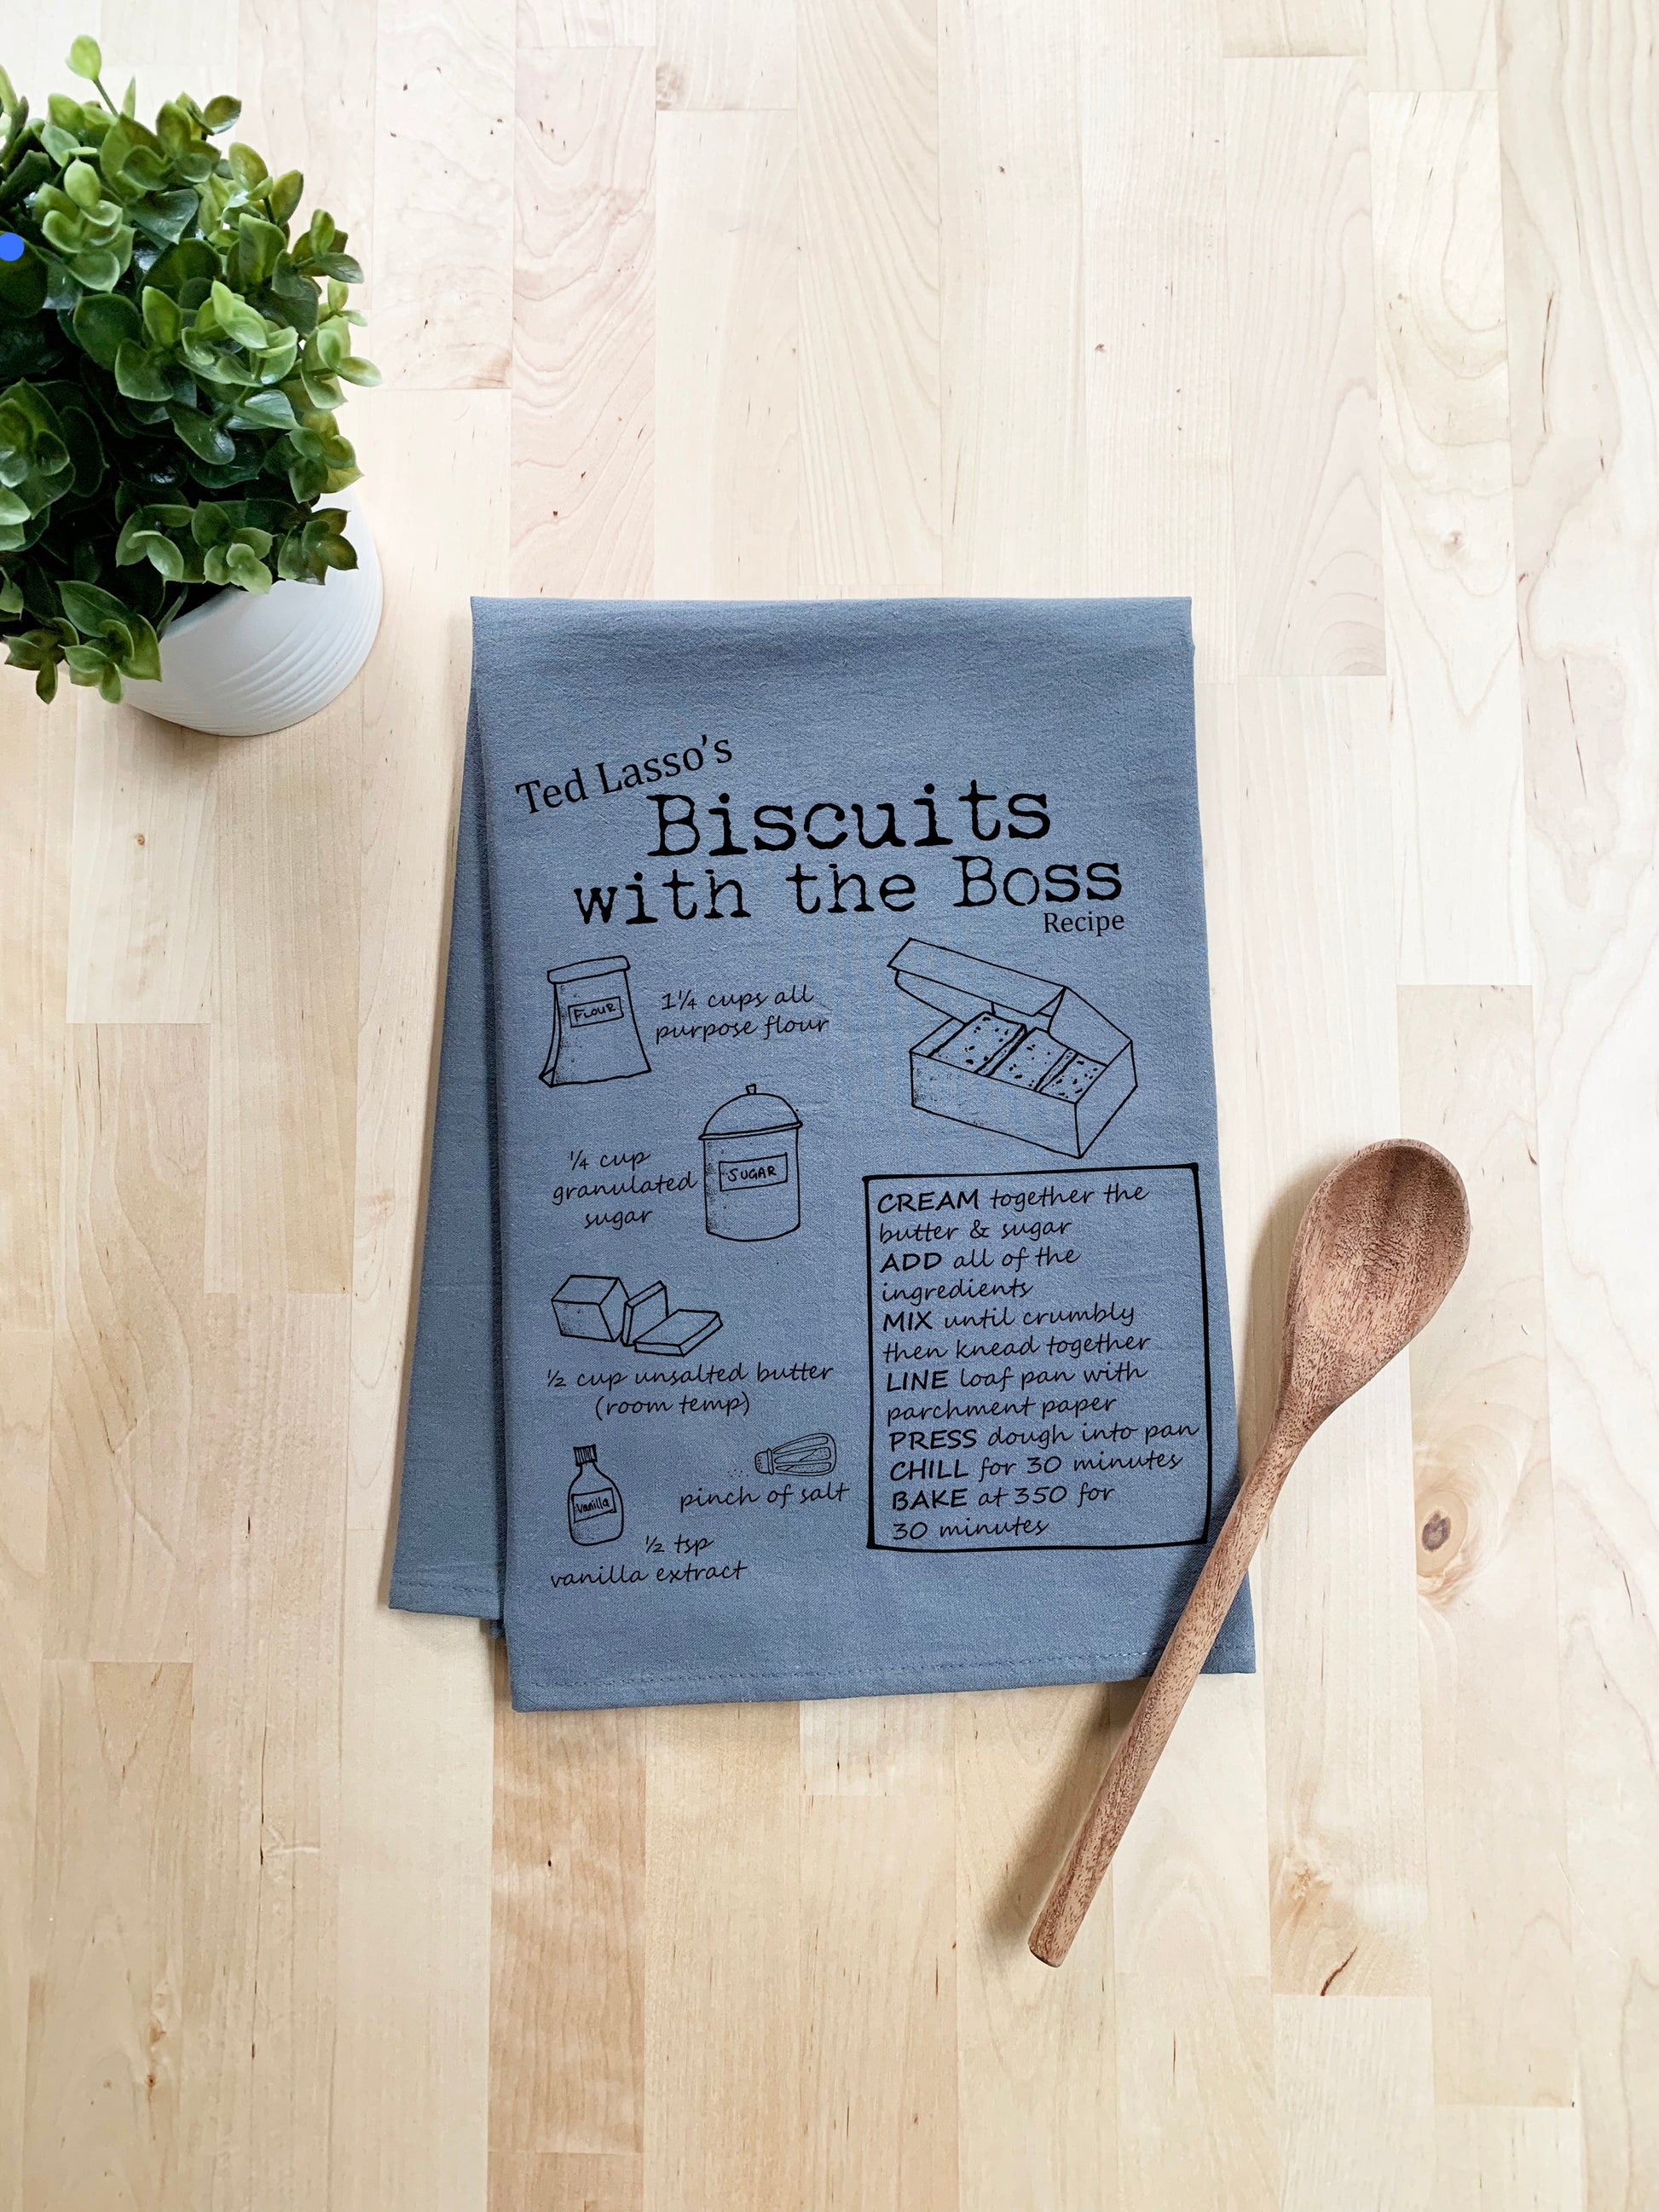 Biscuits With The Boss (Ted Lasso) Dish Towel - White Or Gray - MoonlightMakers